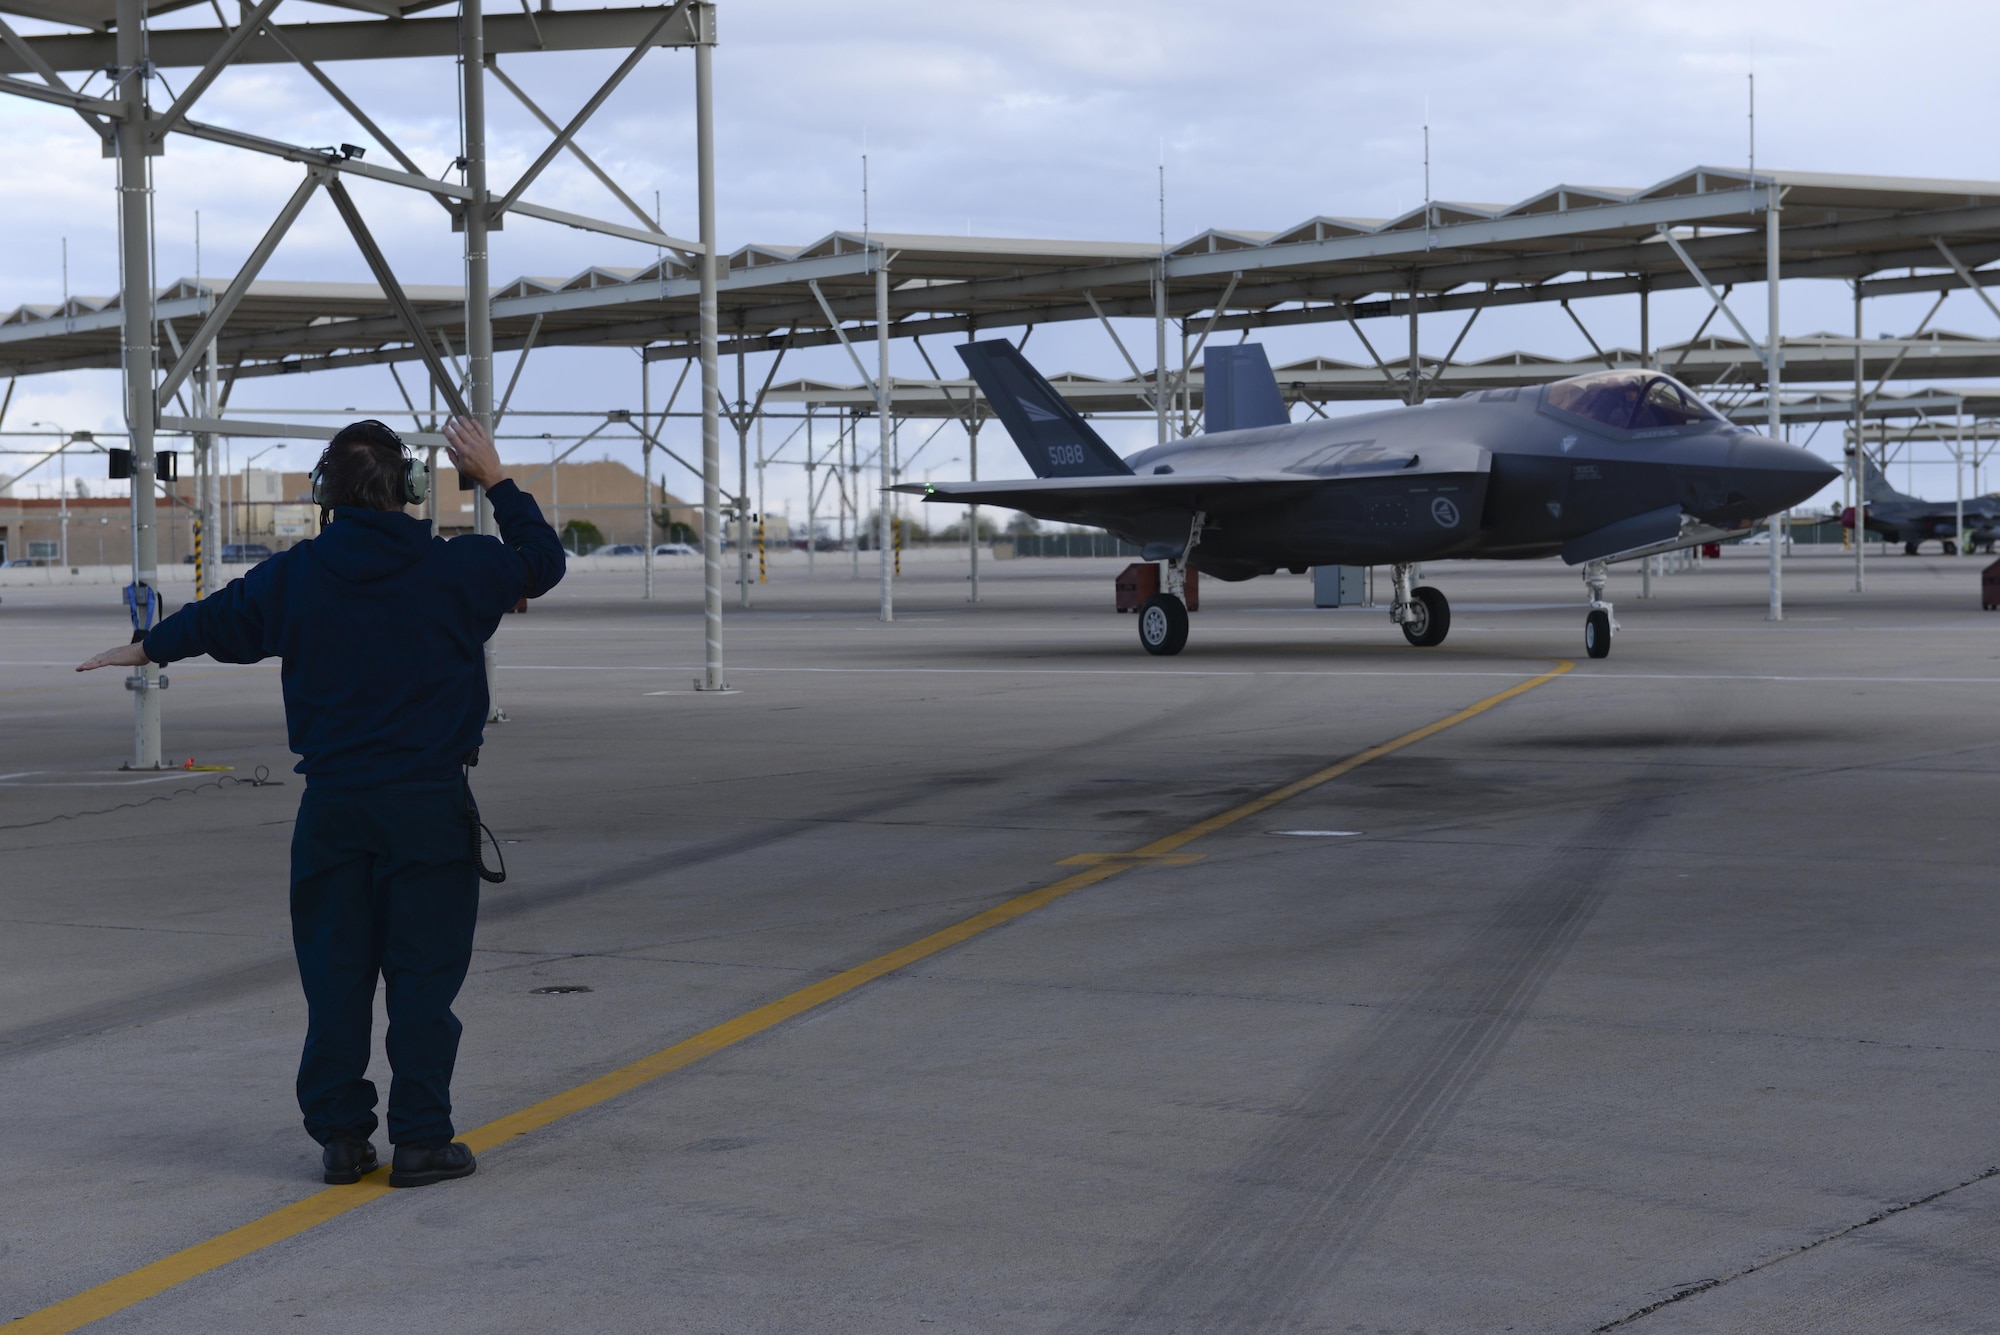 An F-35 Lightning II piloted by Royal Norwegian Air Force Maj. Morten Hanche, a 62nd Fighter Squadron F-35 student pilot, taxis to rest on the flightline after a successful sortie Dec. 14, 2015, at Luke Air Force Base, Ariz. Hanche is the first Norwegian to fly an F-35, and is now the first Norwegian to have piloted a Norwegian-specific F-35. (U.S. Air Force photo/Airman 1st Class Ridge Shan)